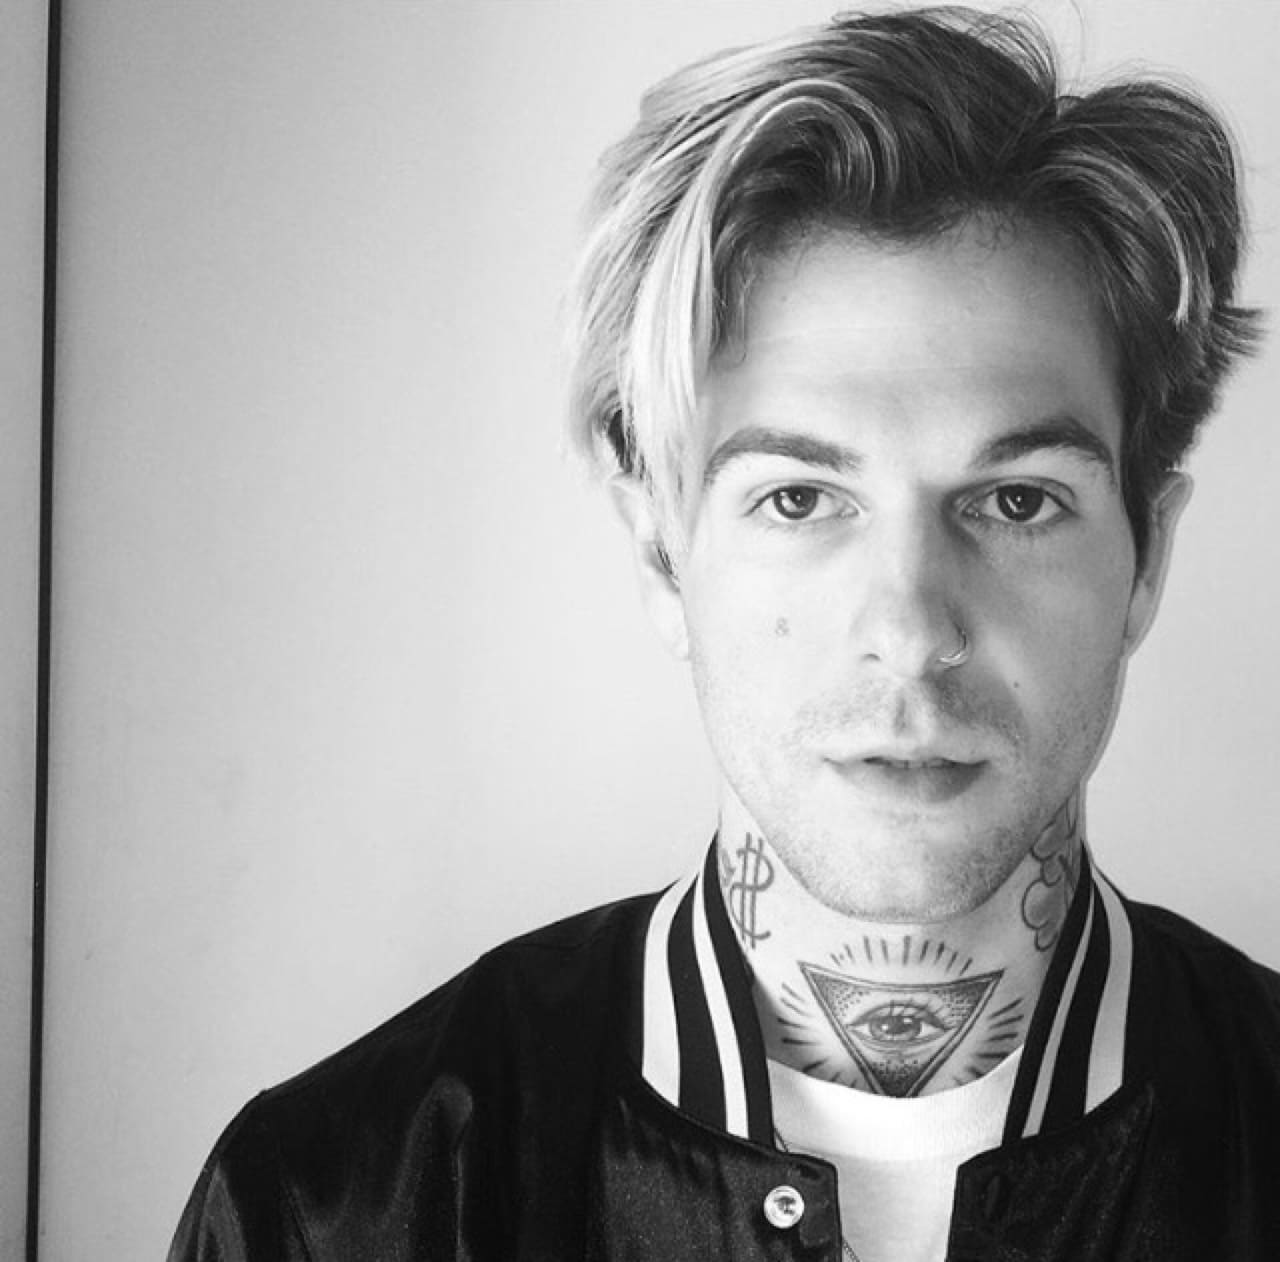 Jesse Rutherford by mauricioneri70 on emaze